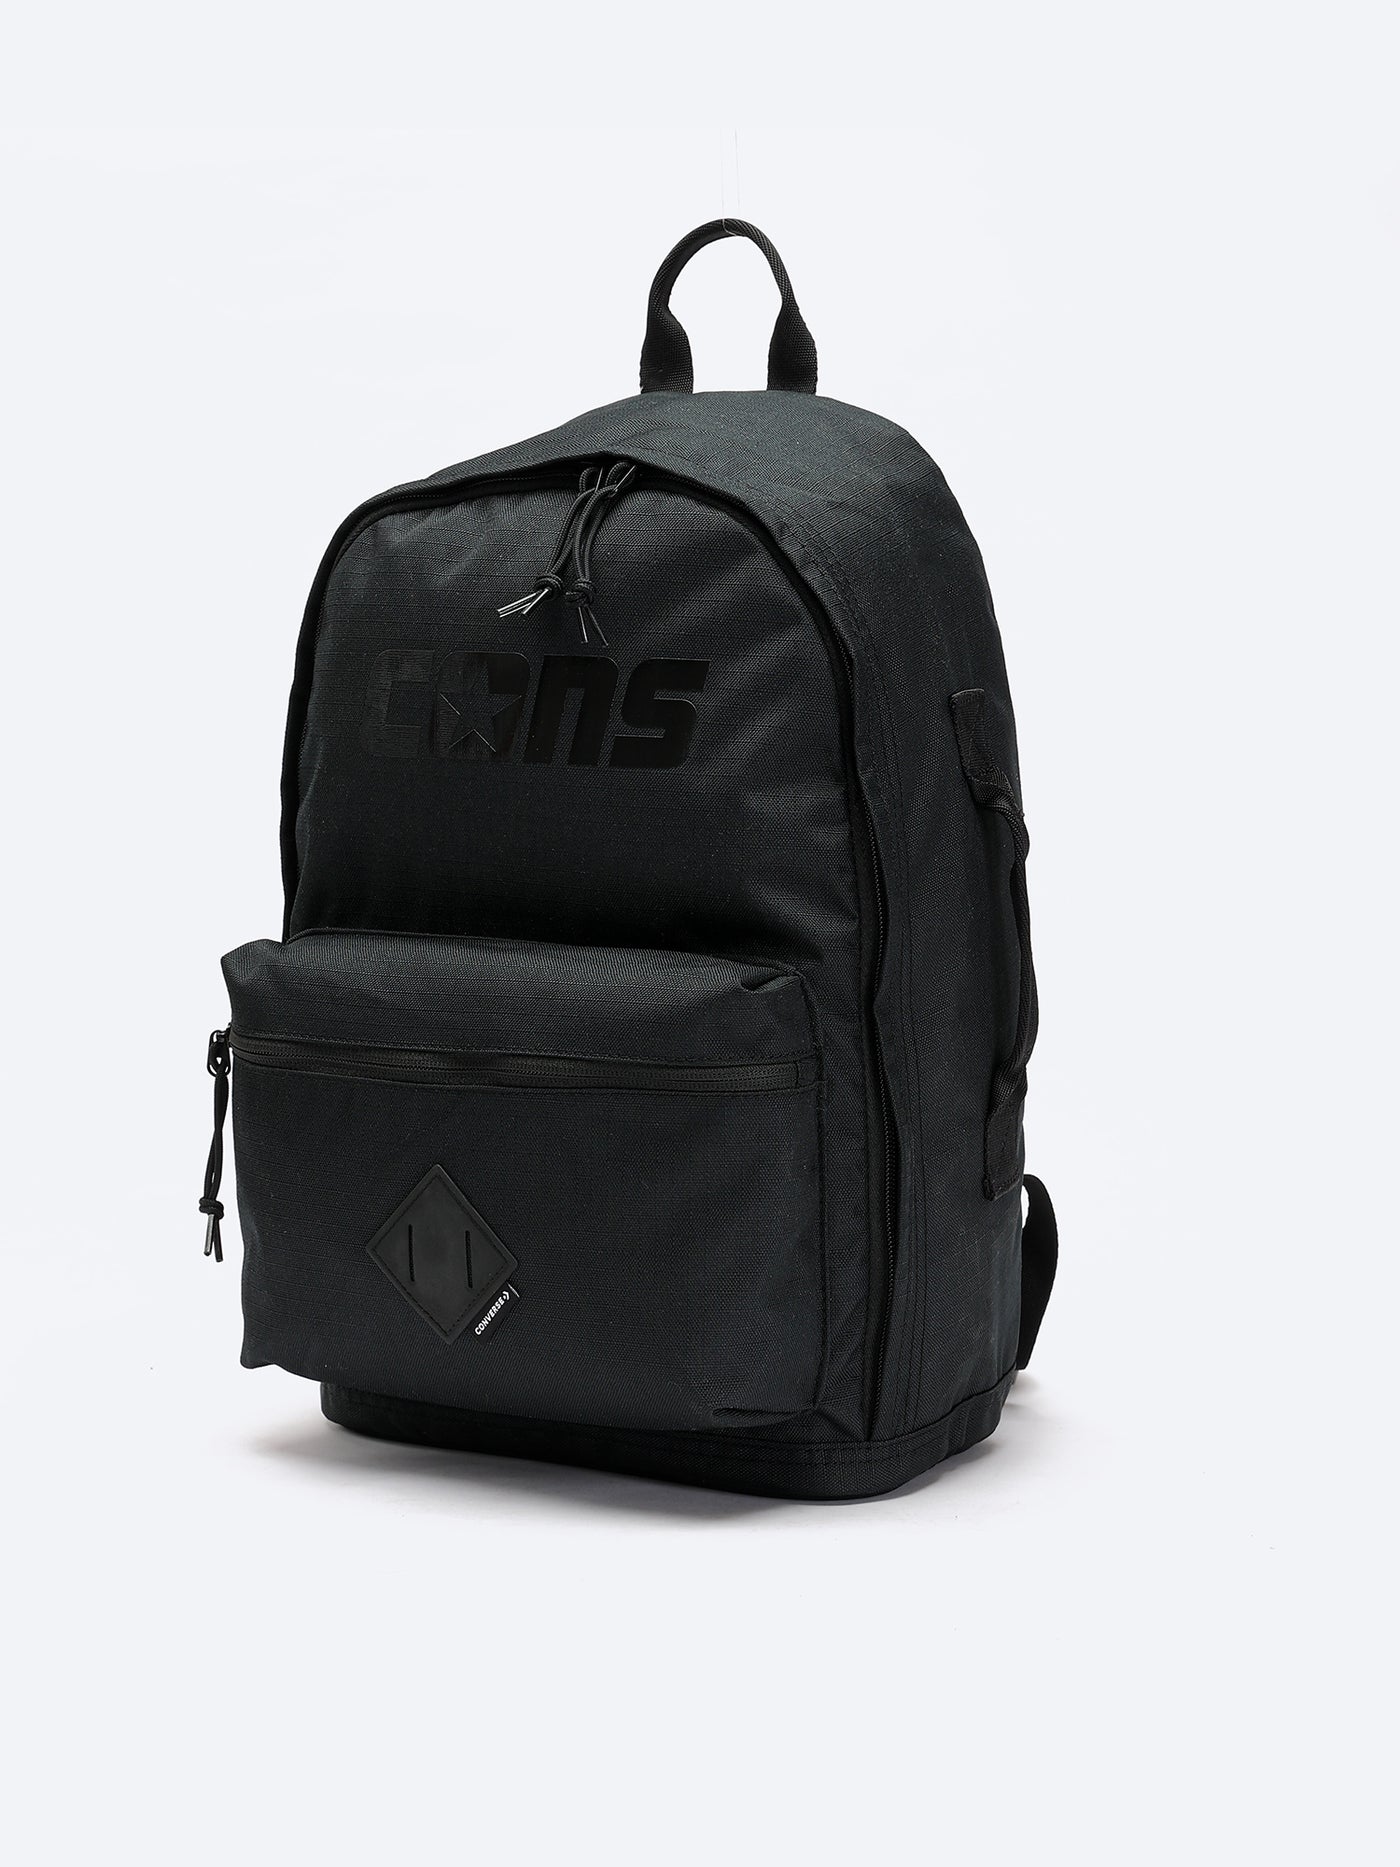 Unisex Backpack - Go 2 - "CONS"